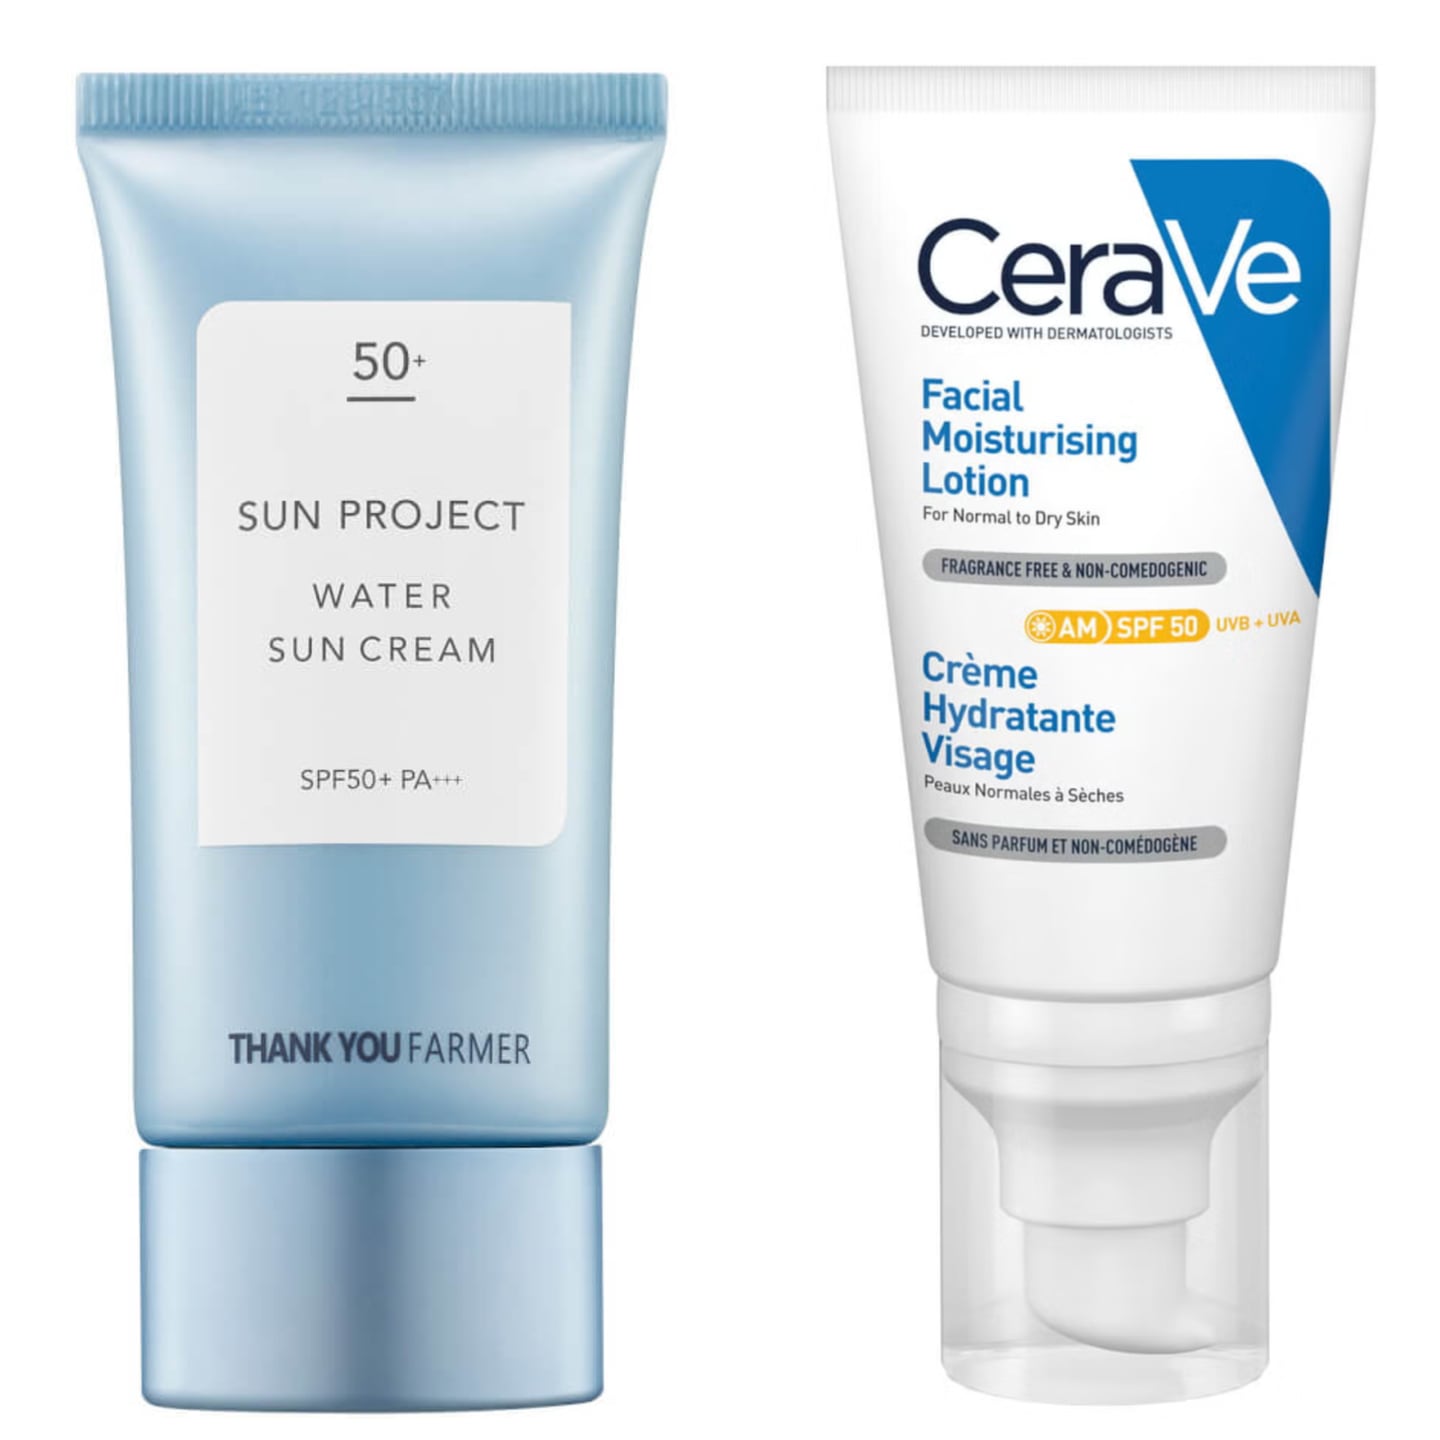 Thank You Farmer Sun Project Water Sun Cream SPF50 (€22.60 from cultbeauty.com) and CeraVe AM Facial Moisturising Lotion SPF50 (€18 from Boots)